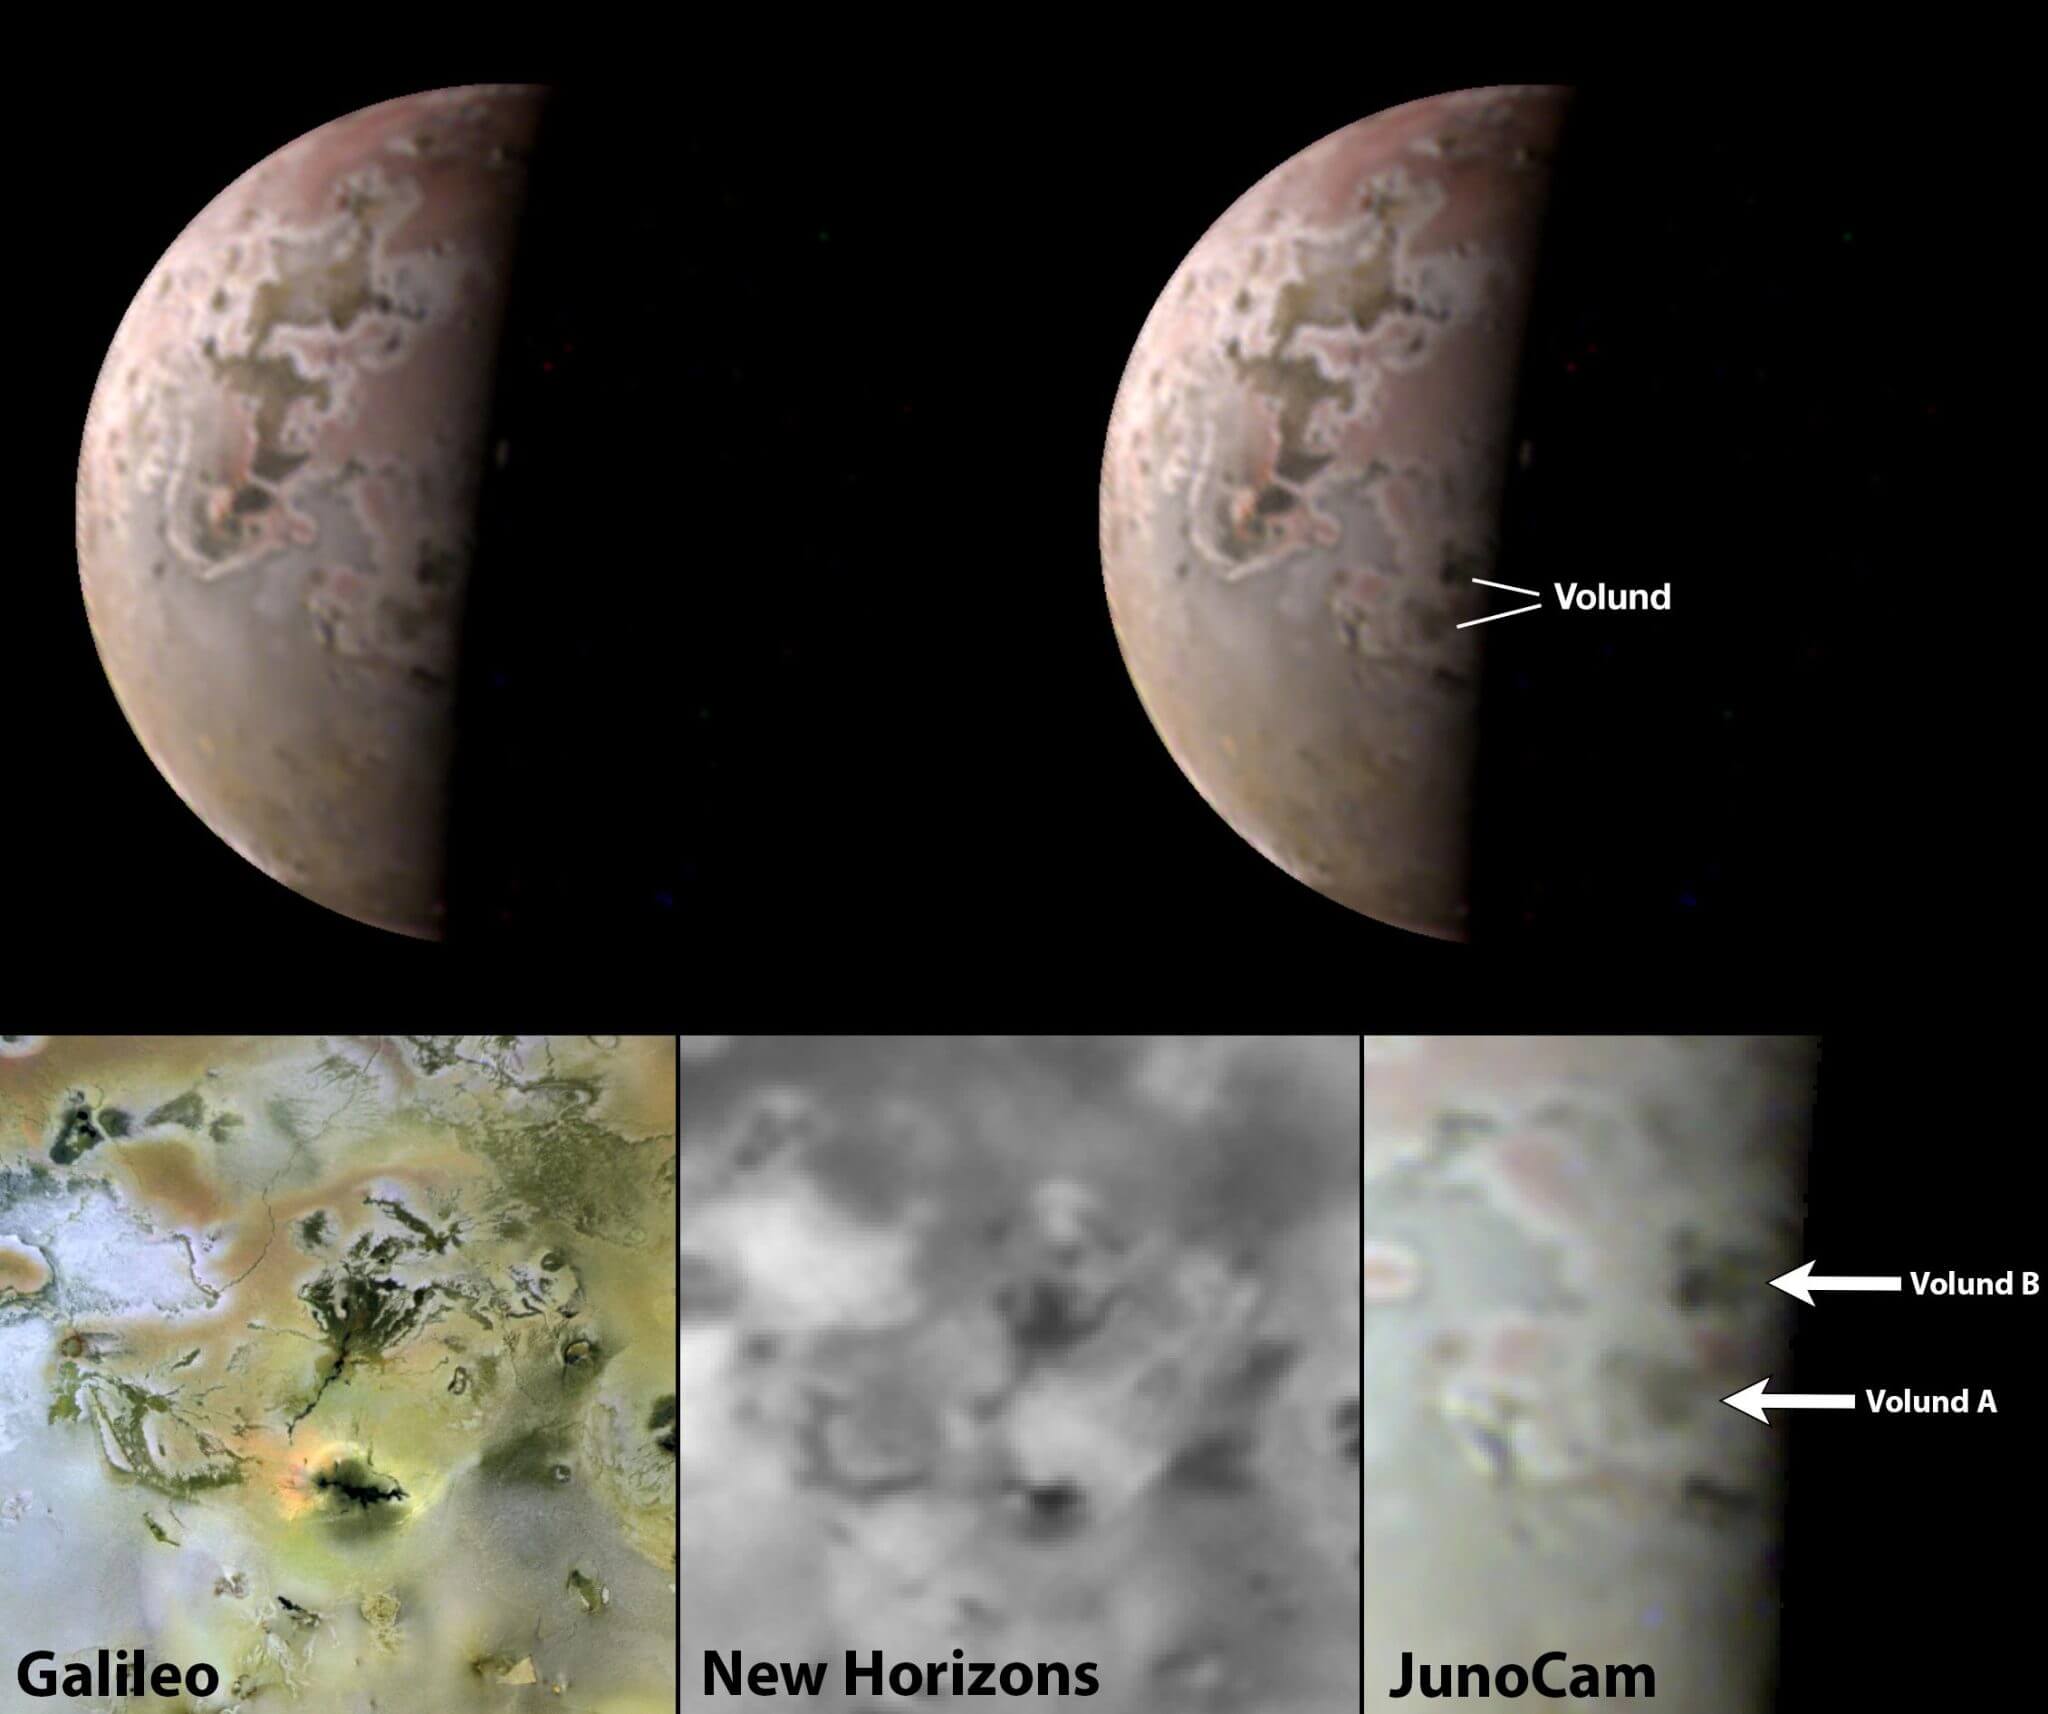 At top and lower right, Juno-Cam images taken in May 2023 of Jupiter's moon Io show that the lava fields around Volund E and B volcanoes appear to be growing in size. Previous NASA probes imaged the same region in 1996, lower left, and in 2007, lower center. Credit: Galileo: NASA/JPL/University of Arizona. New Horizons: NASA/JHUAPL/SWRI. Juno: Image data: NASA/JPL-Caltech/SwRI/MSSS. Image manipulation: Jason Perry (CC BY)